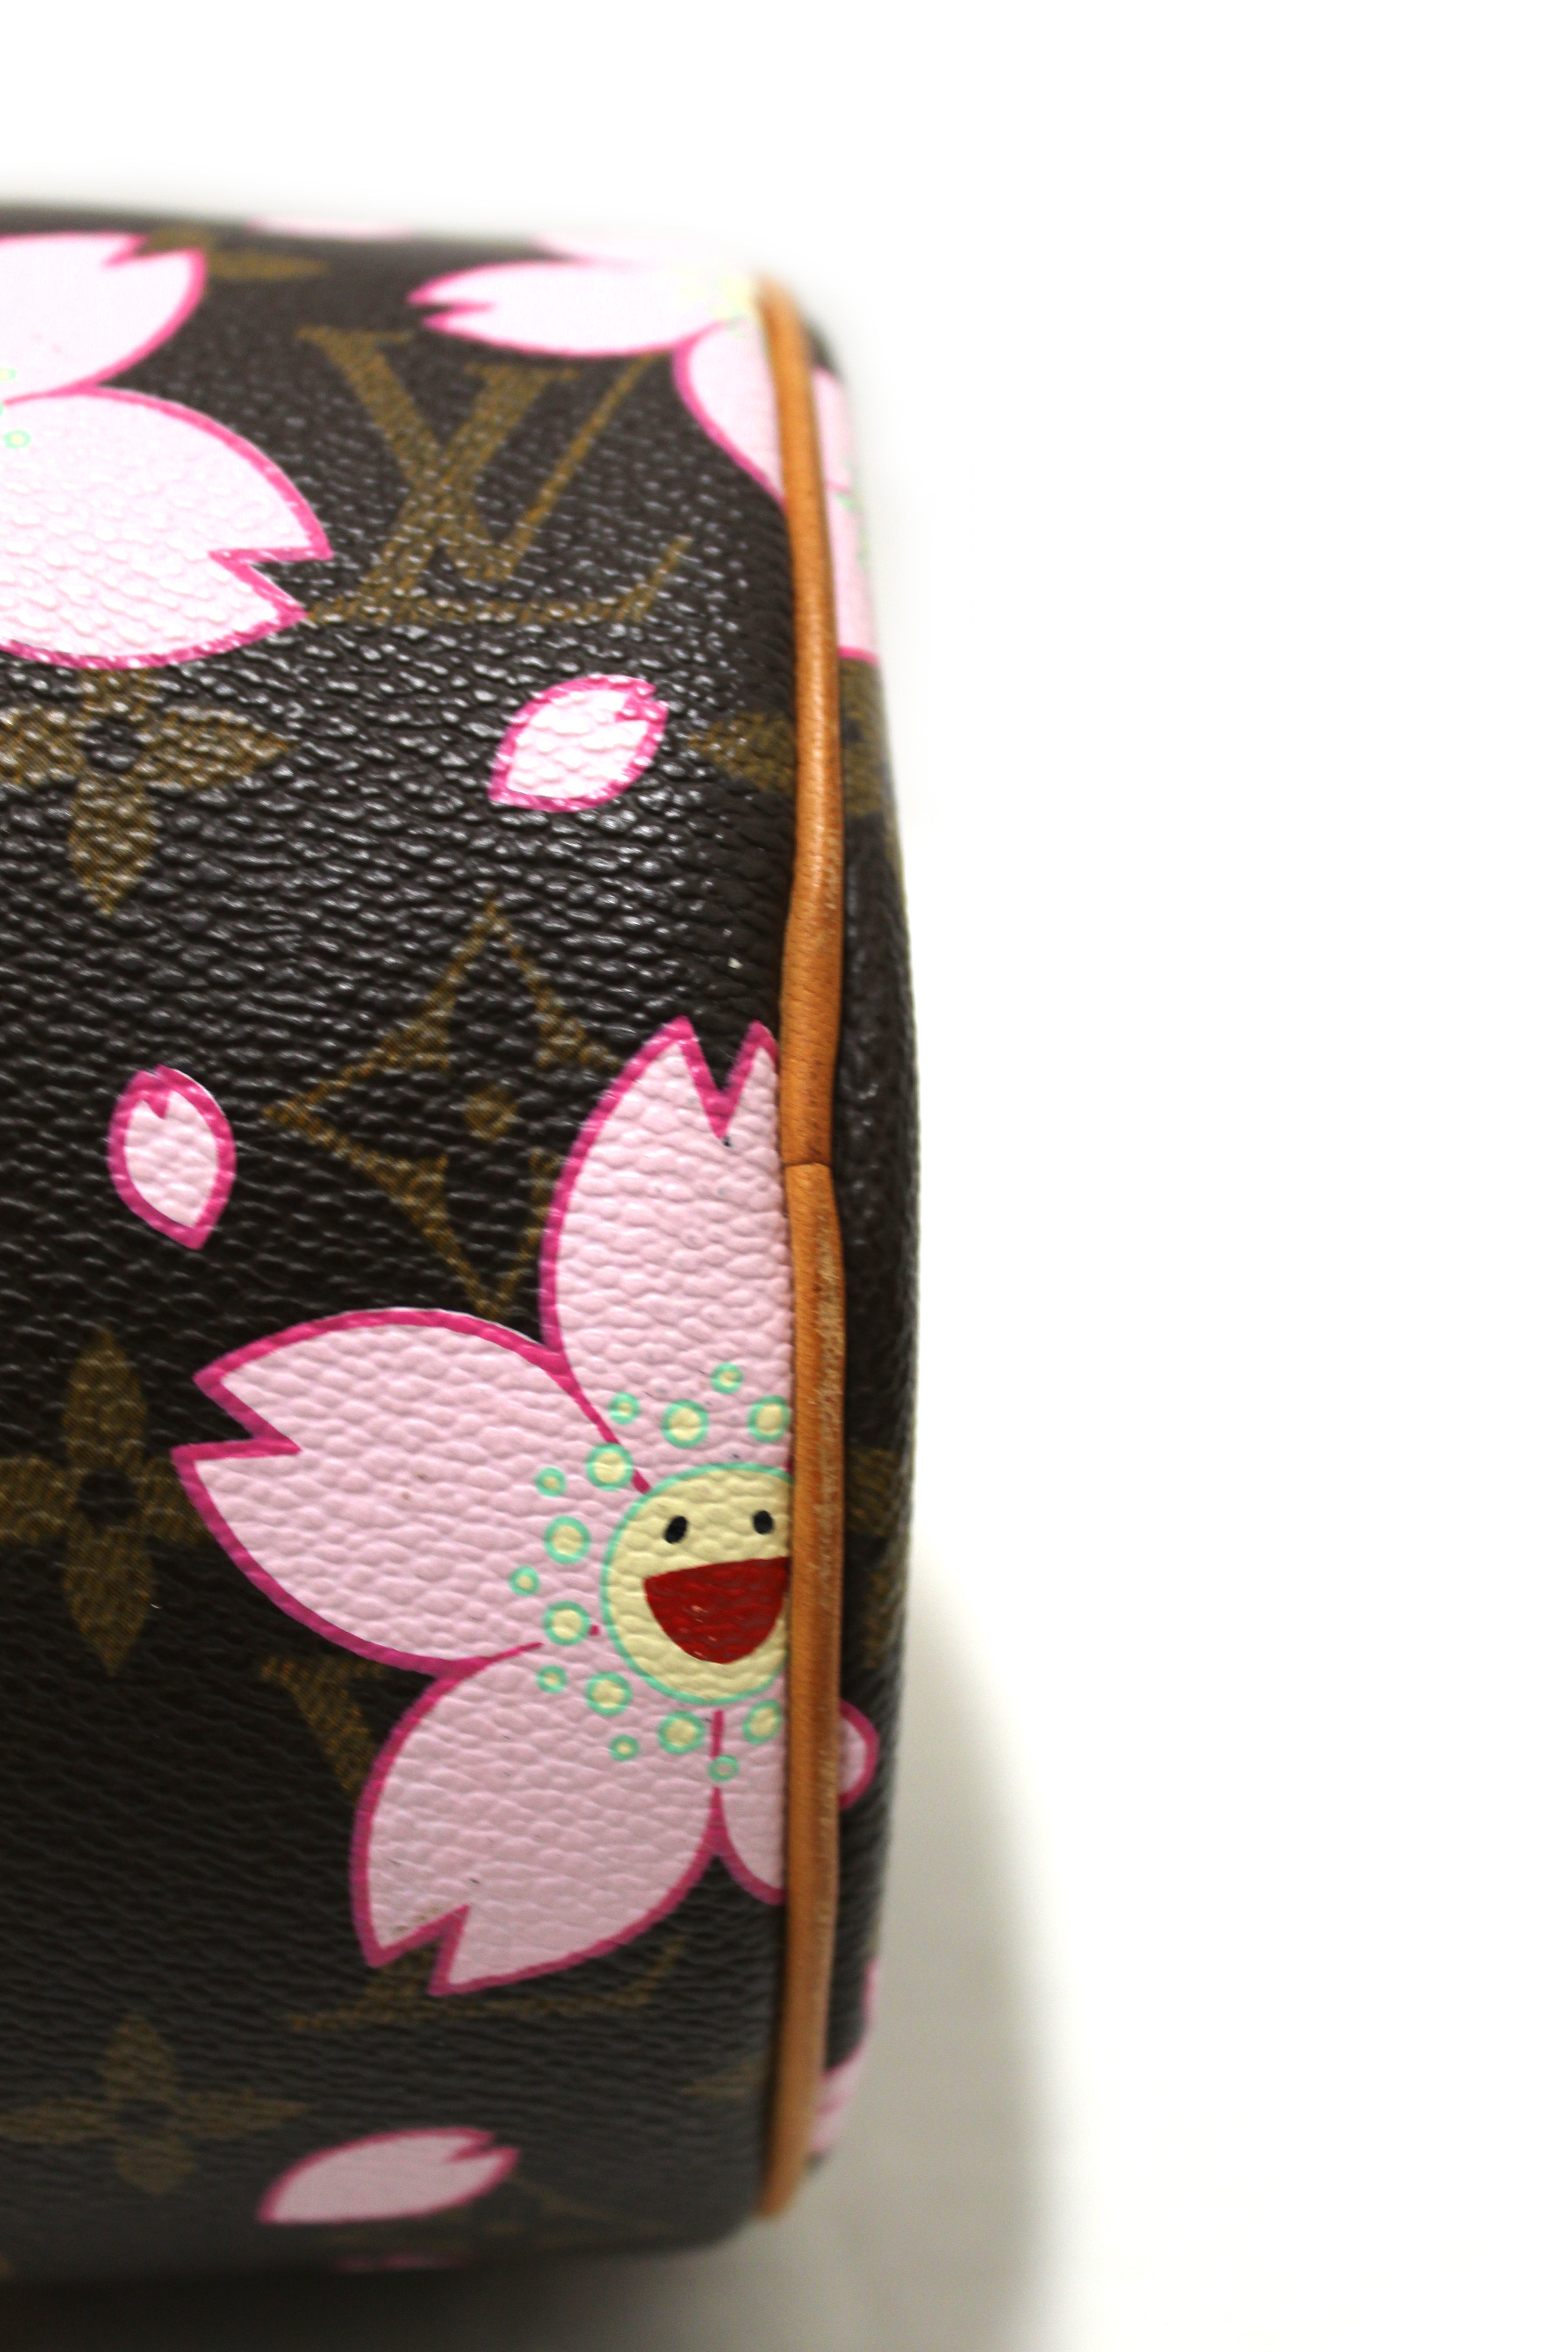 How to Spot Authentic Louis Vuitton Papillon Cherry Blossom 🌸 and Where is  the Date Code? 